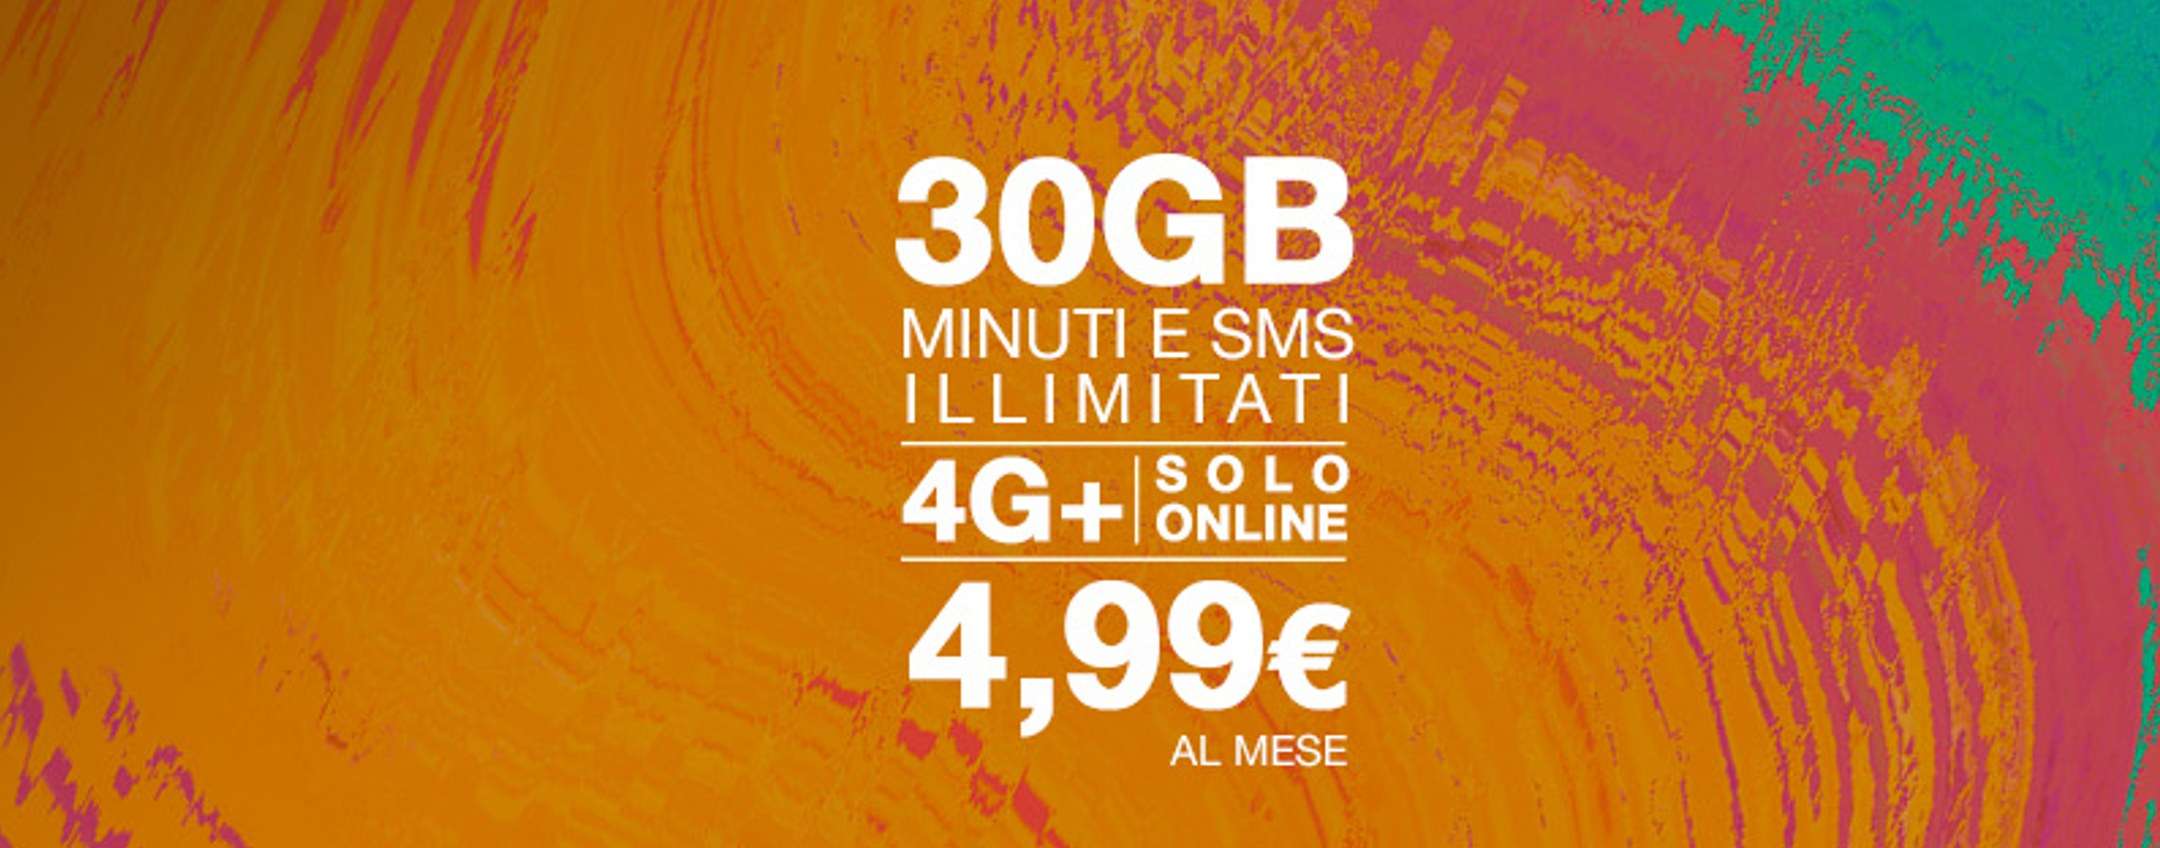 PROMO Weekend: PosteMobile a 4,99€ con 30GB